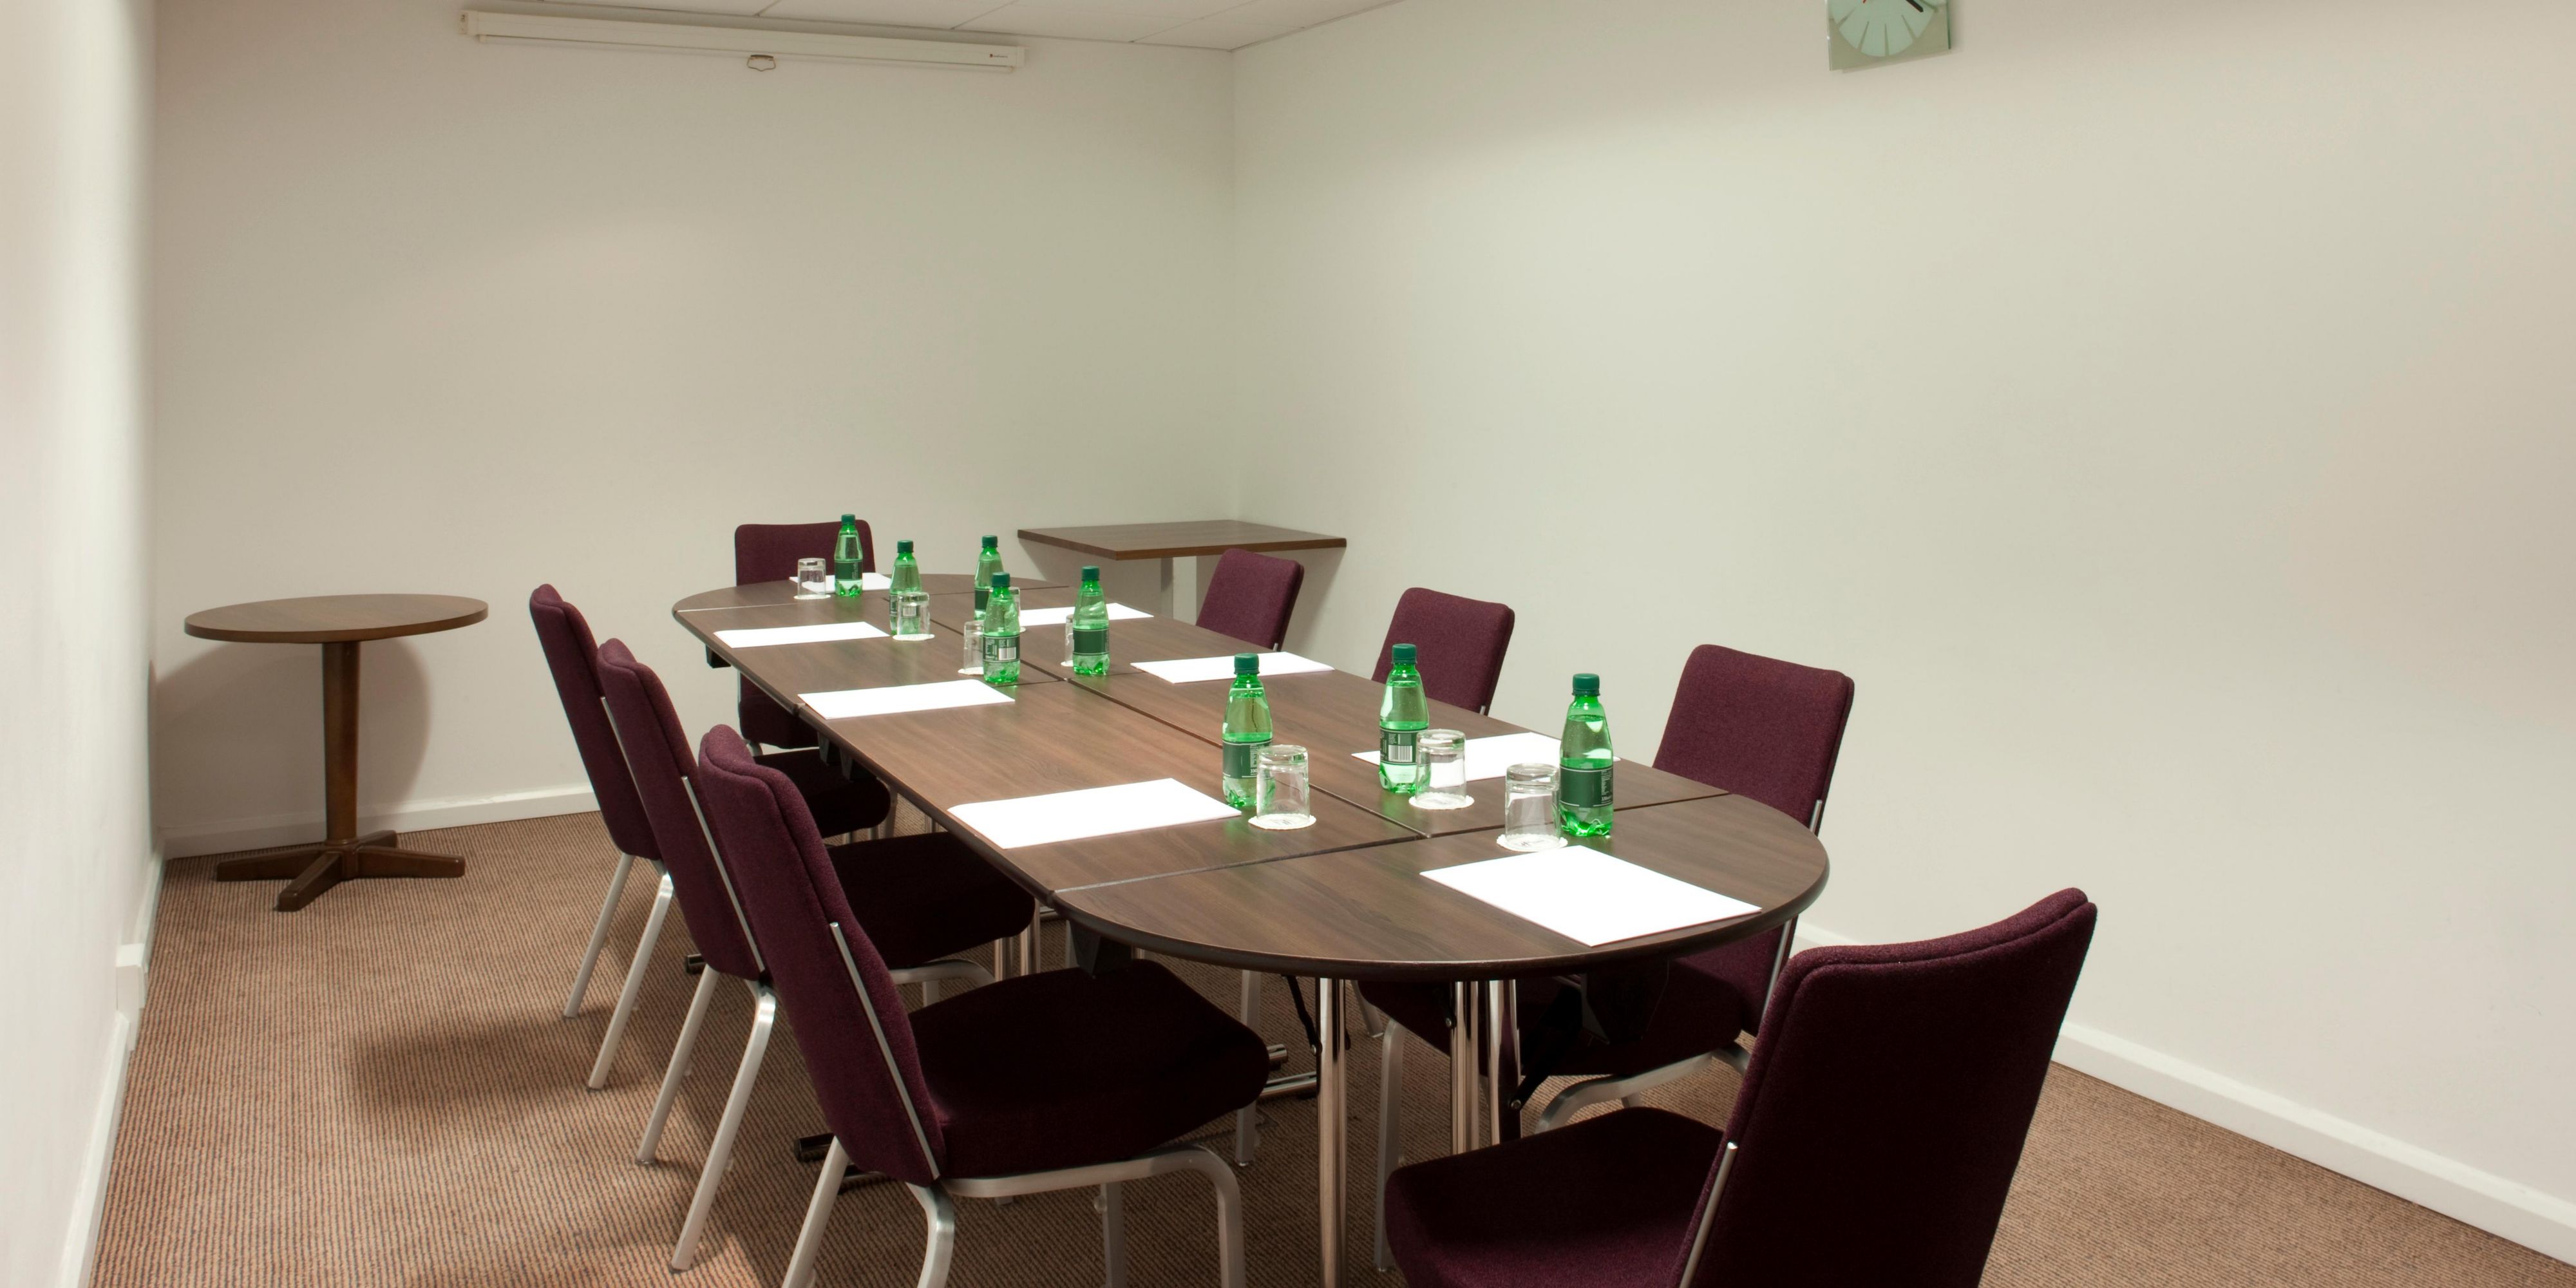 Want a bit more space than you've got in the office? Our meeting rooms offer a modern location to get together with colleagues in a comfortable, professional, and safe environment. We can provide lunches and accommodation for those travelling from further afield.